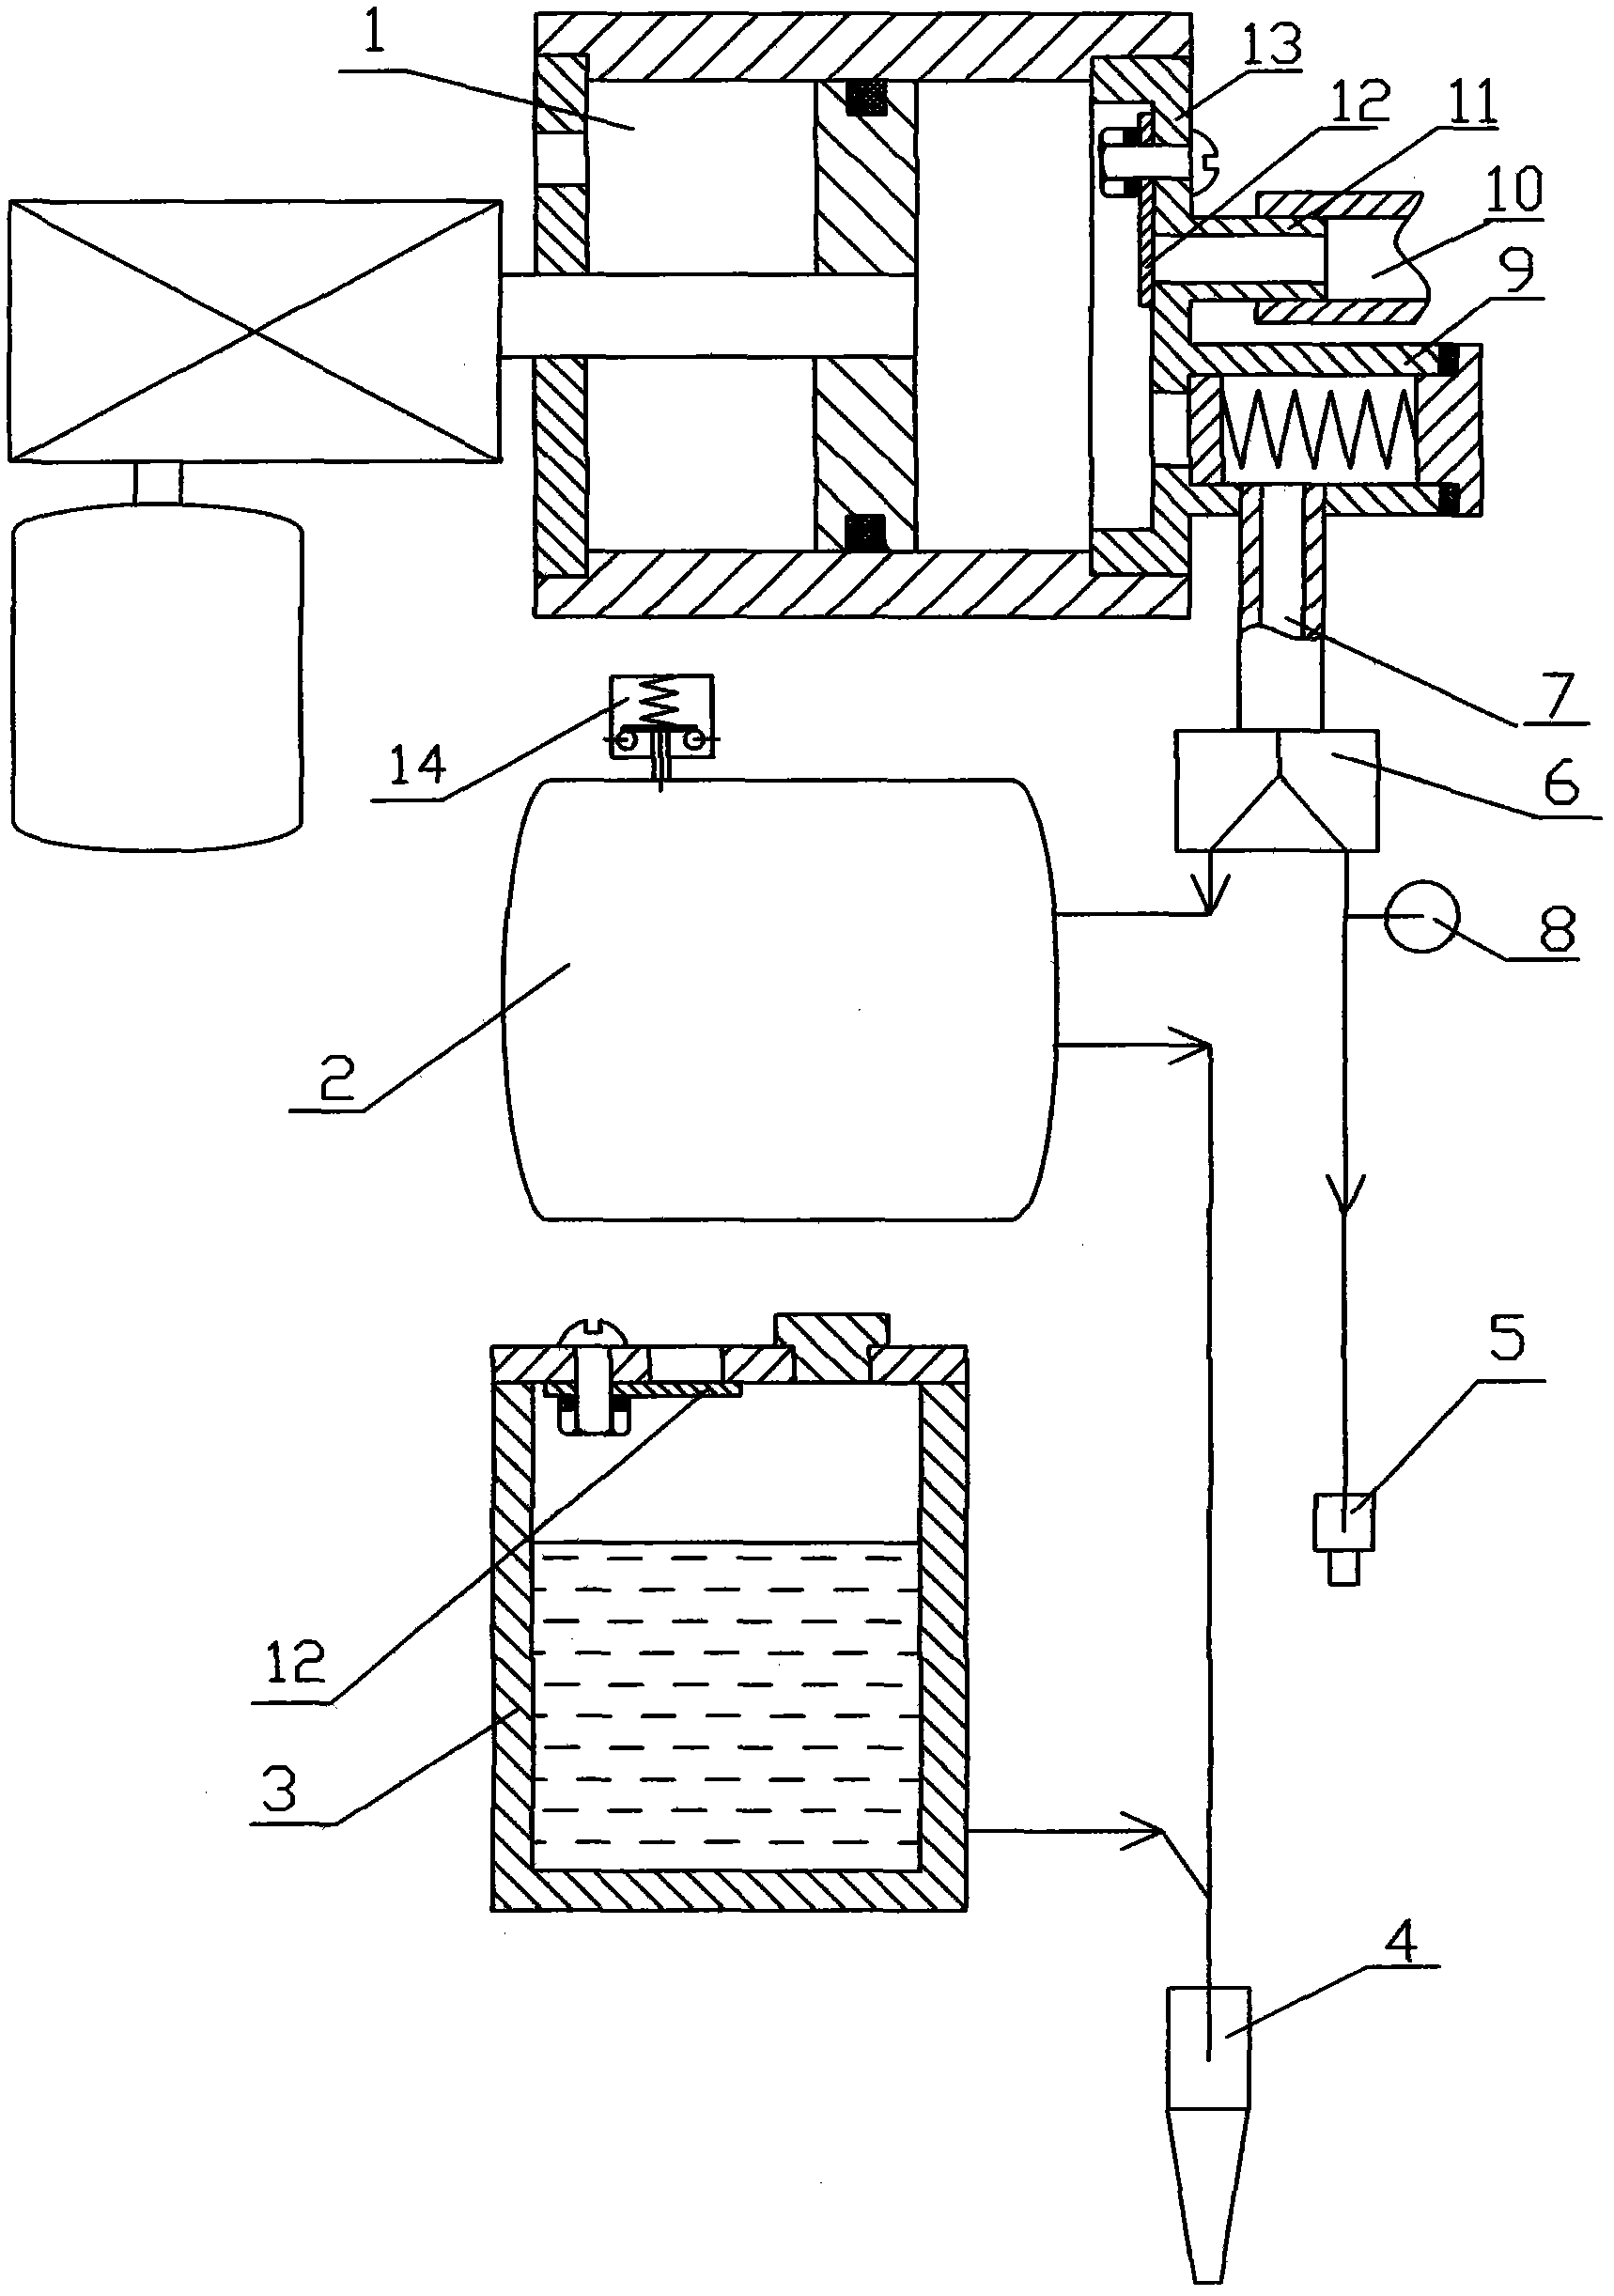 Dual-purpose device for vehicle cleaning and air inflation